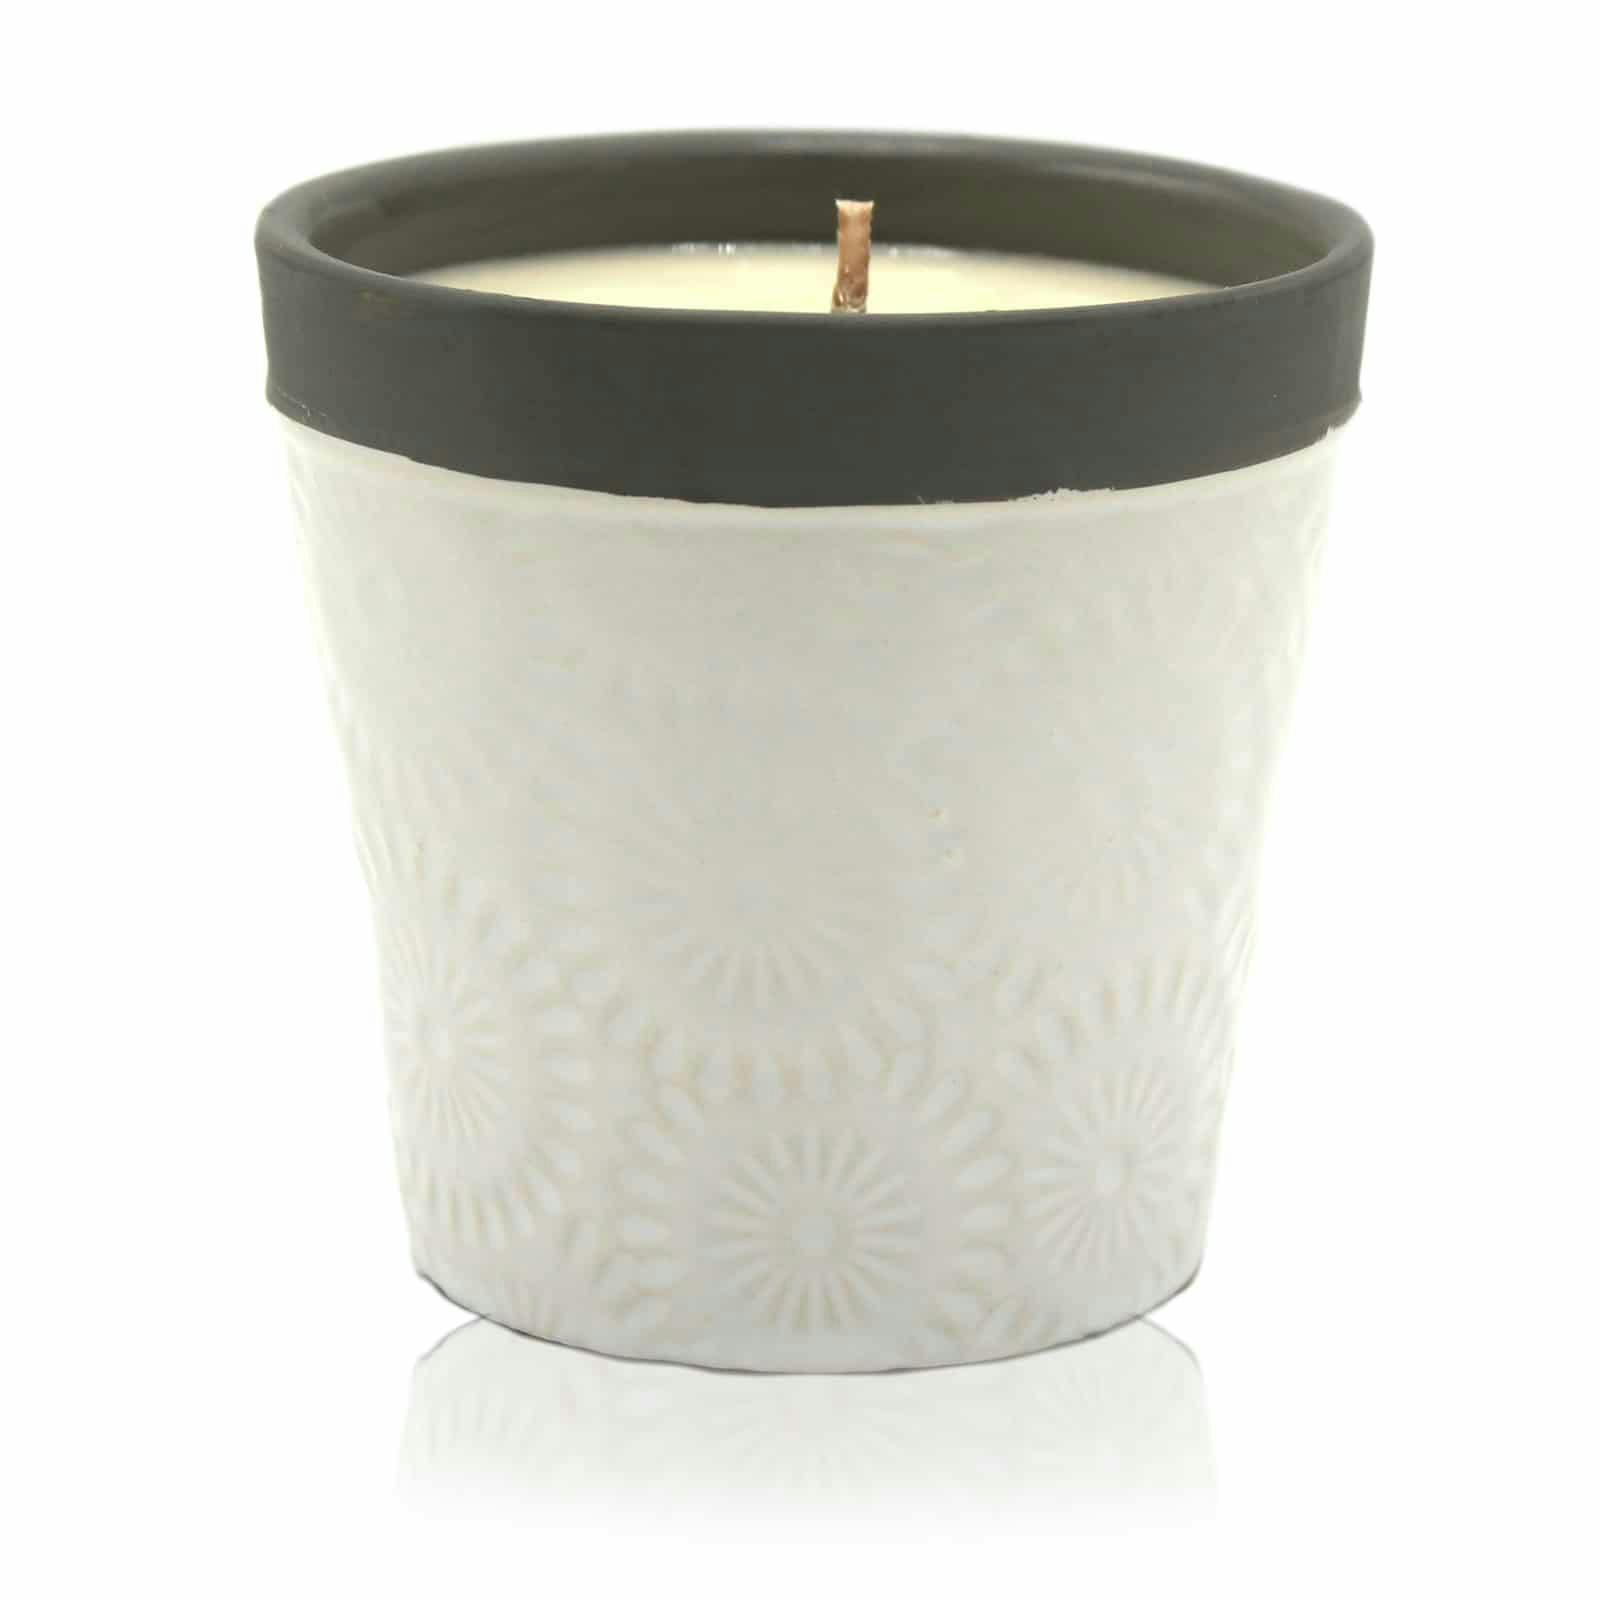 Home is Home Candle Pots - Forever Vanilla Image